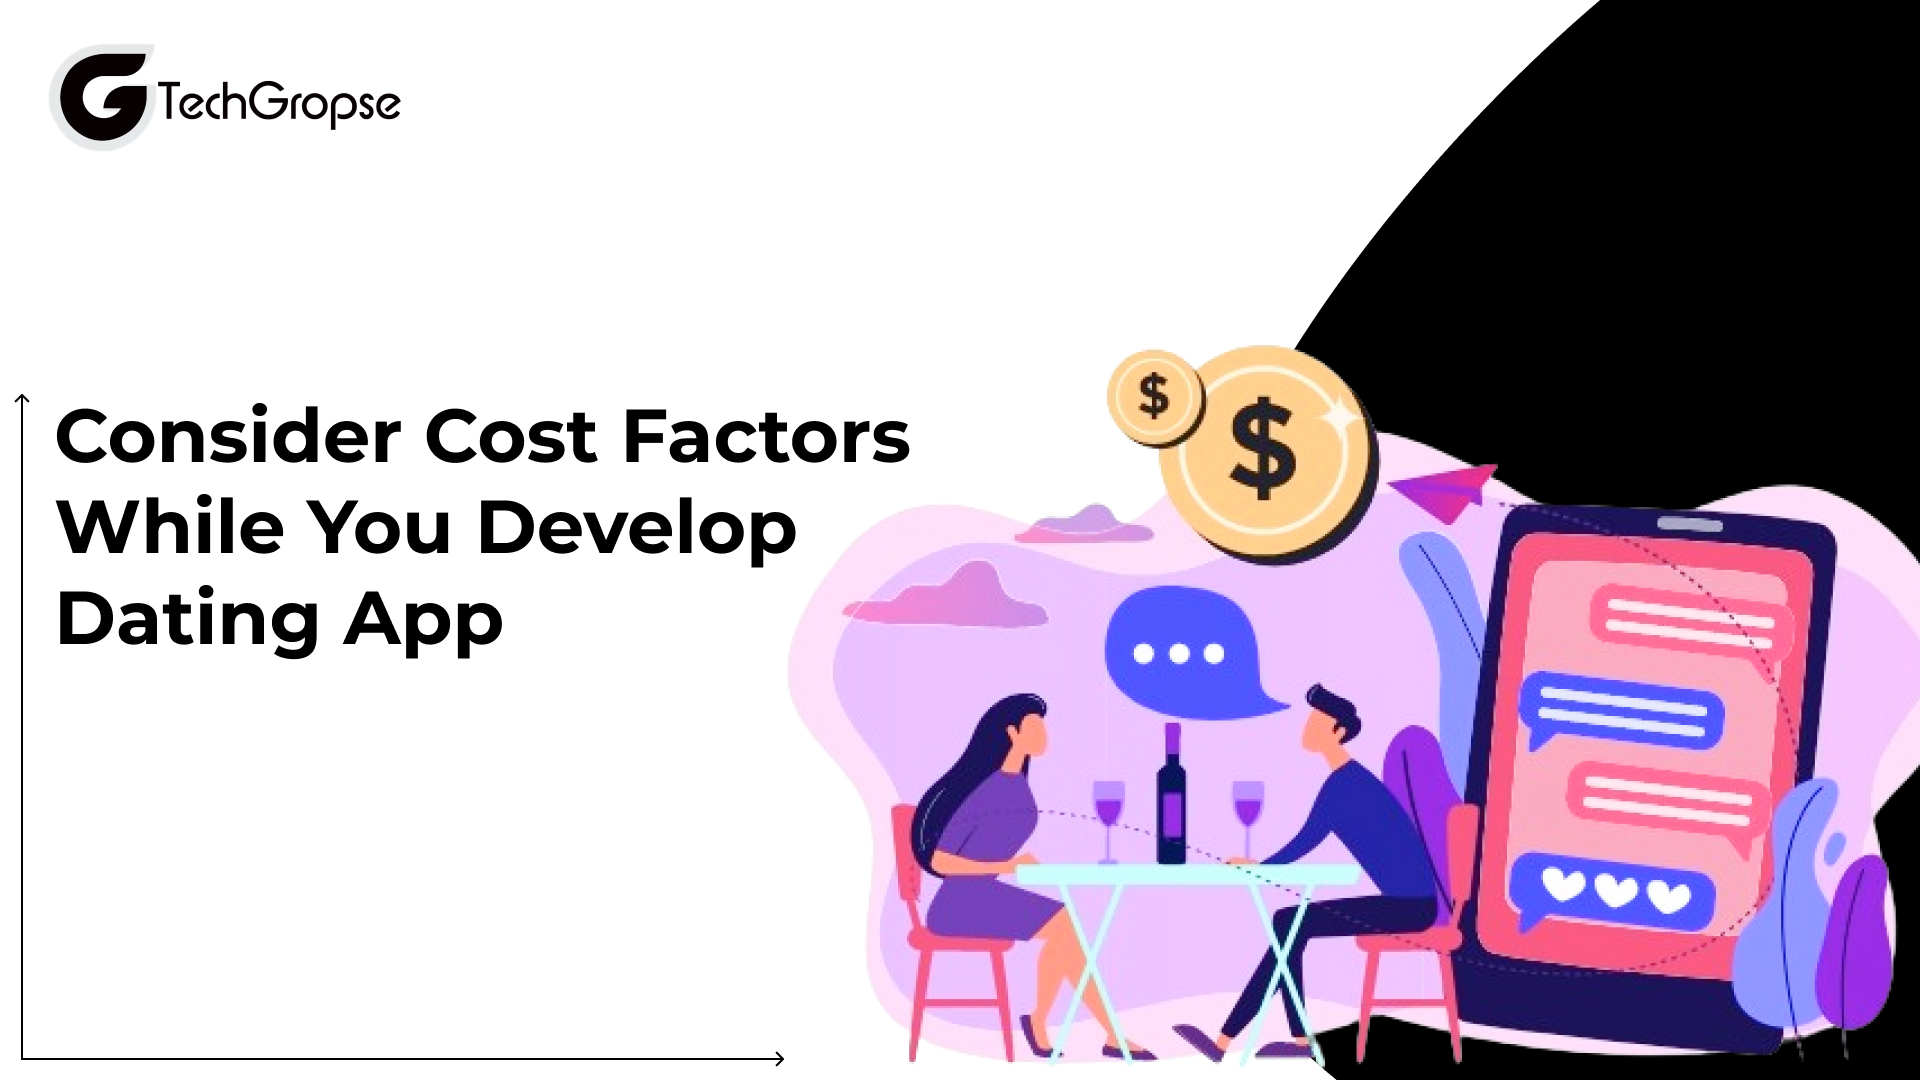 Consider Cost Factors While You Develop Dating App